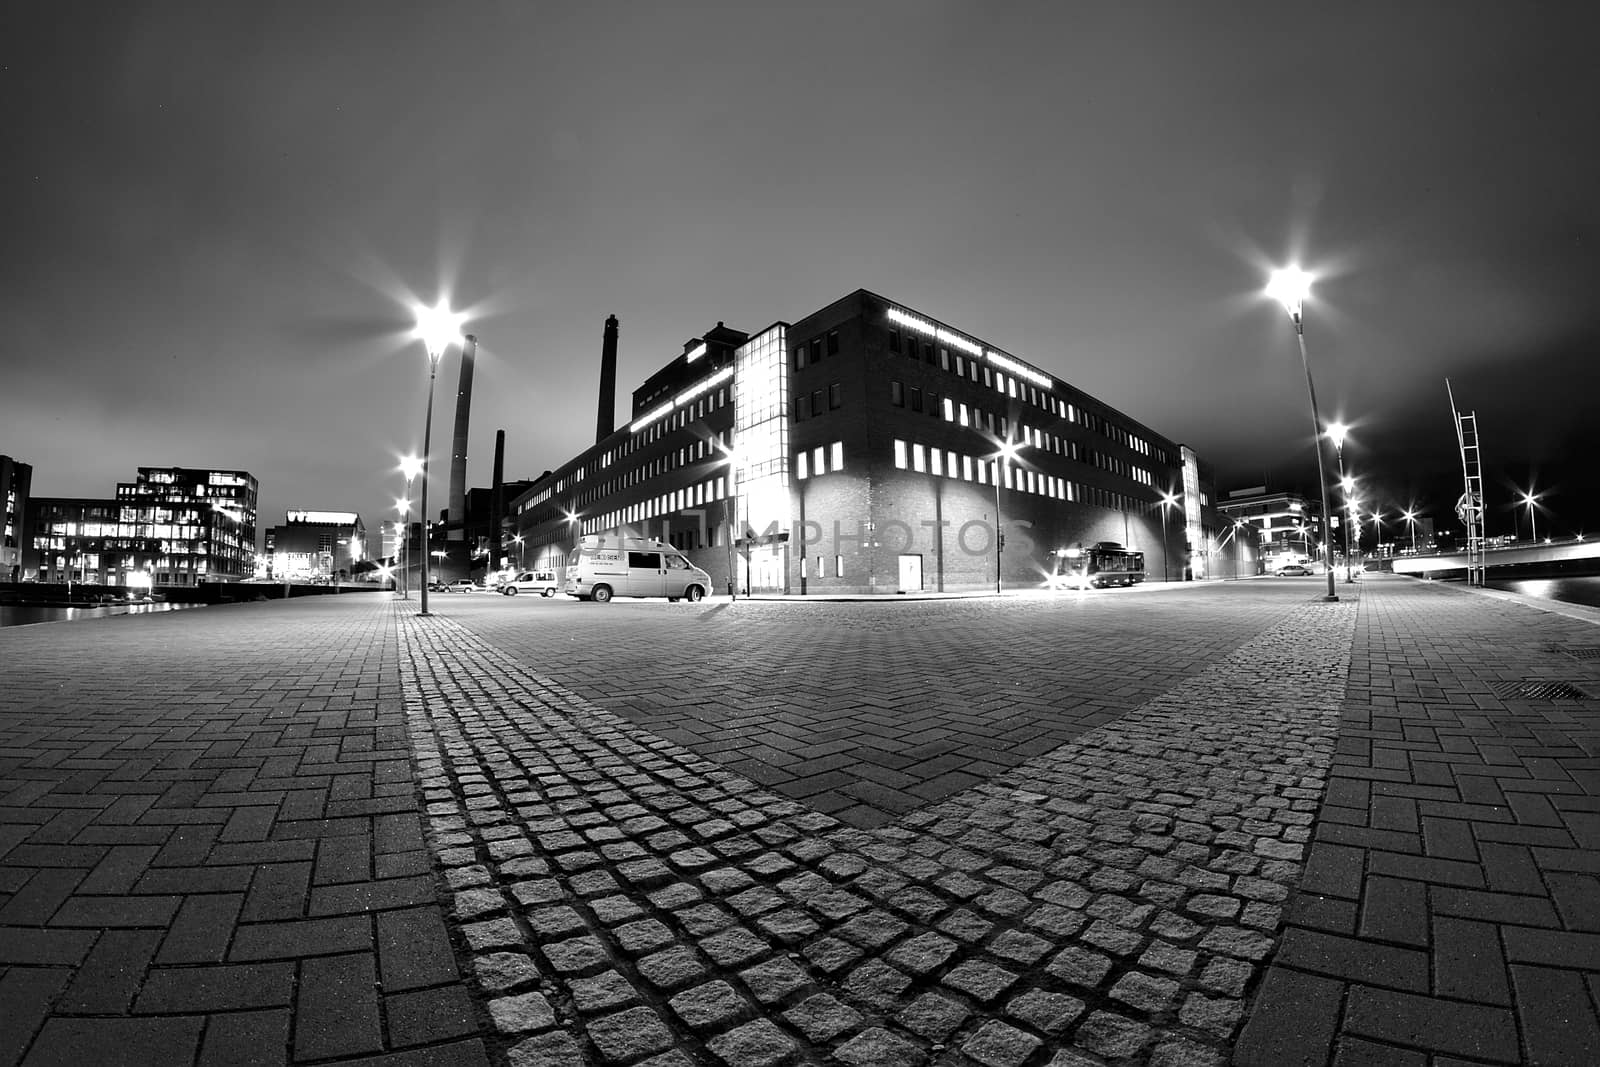 Dramatic low angle black and white night photo of. Large building between lamp posts and stone pavement on foreground.